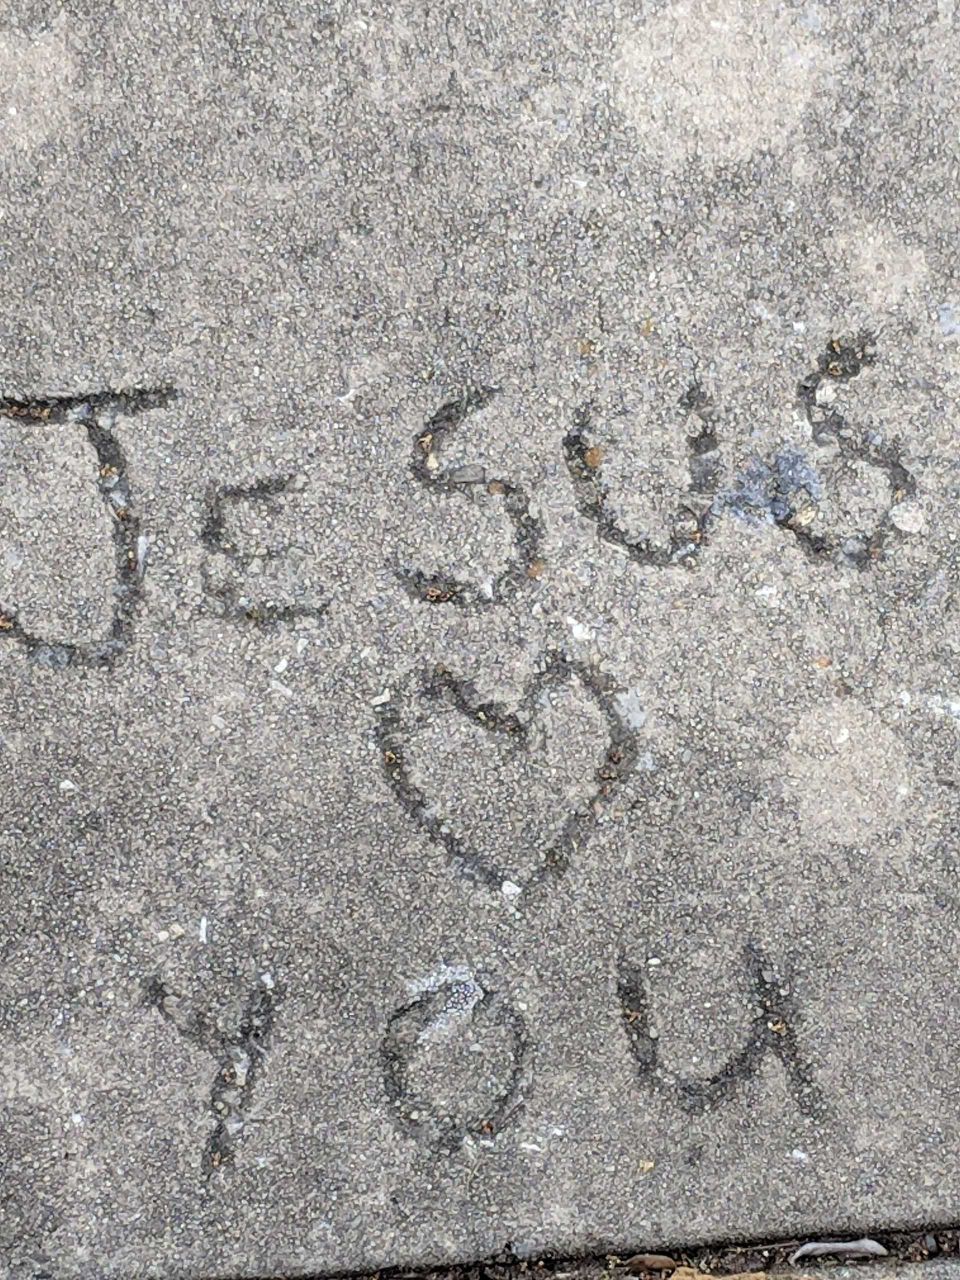 Jesus loves you drawn into the cement of an old sidewalk.